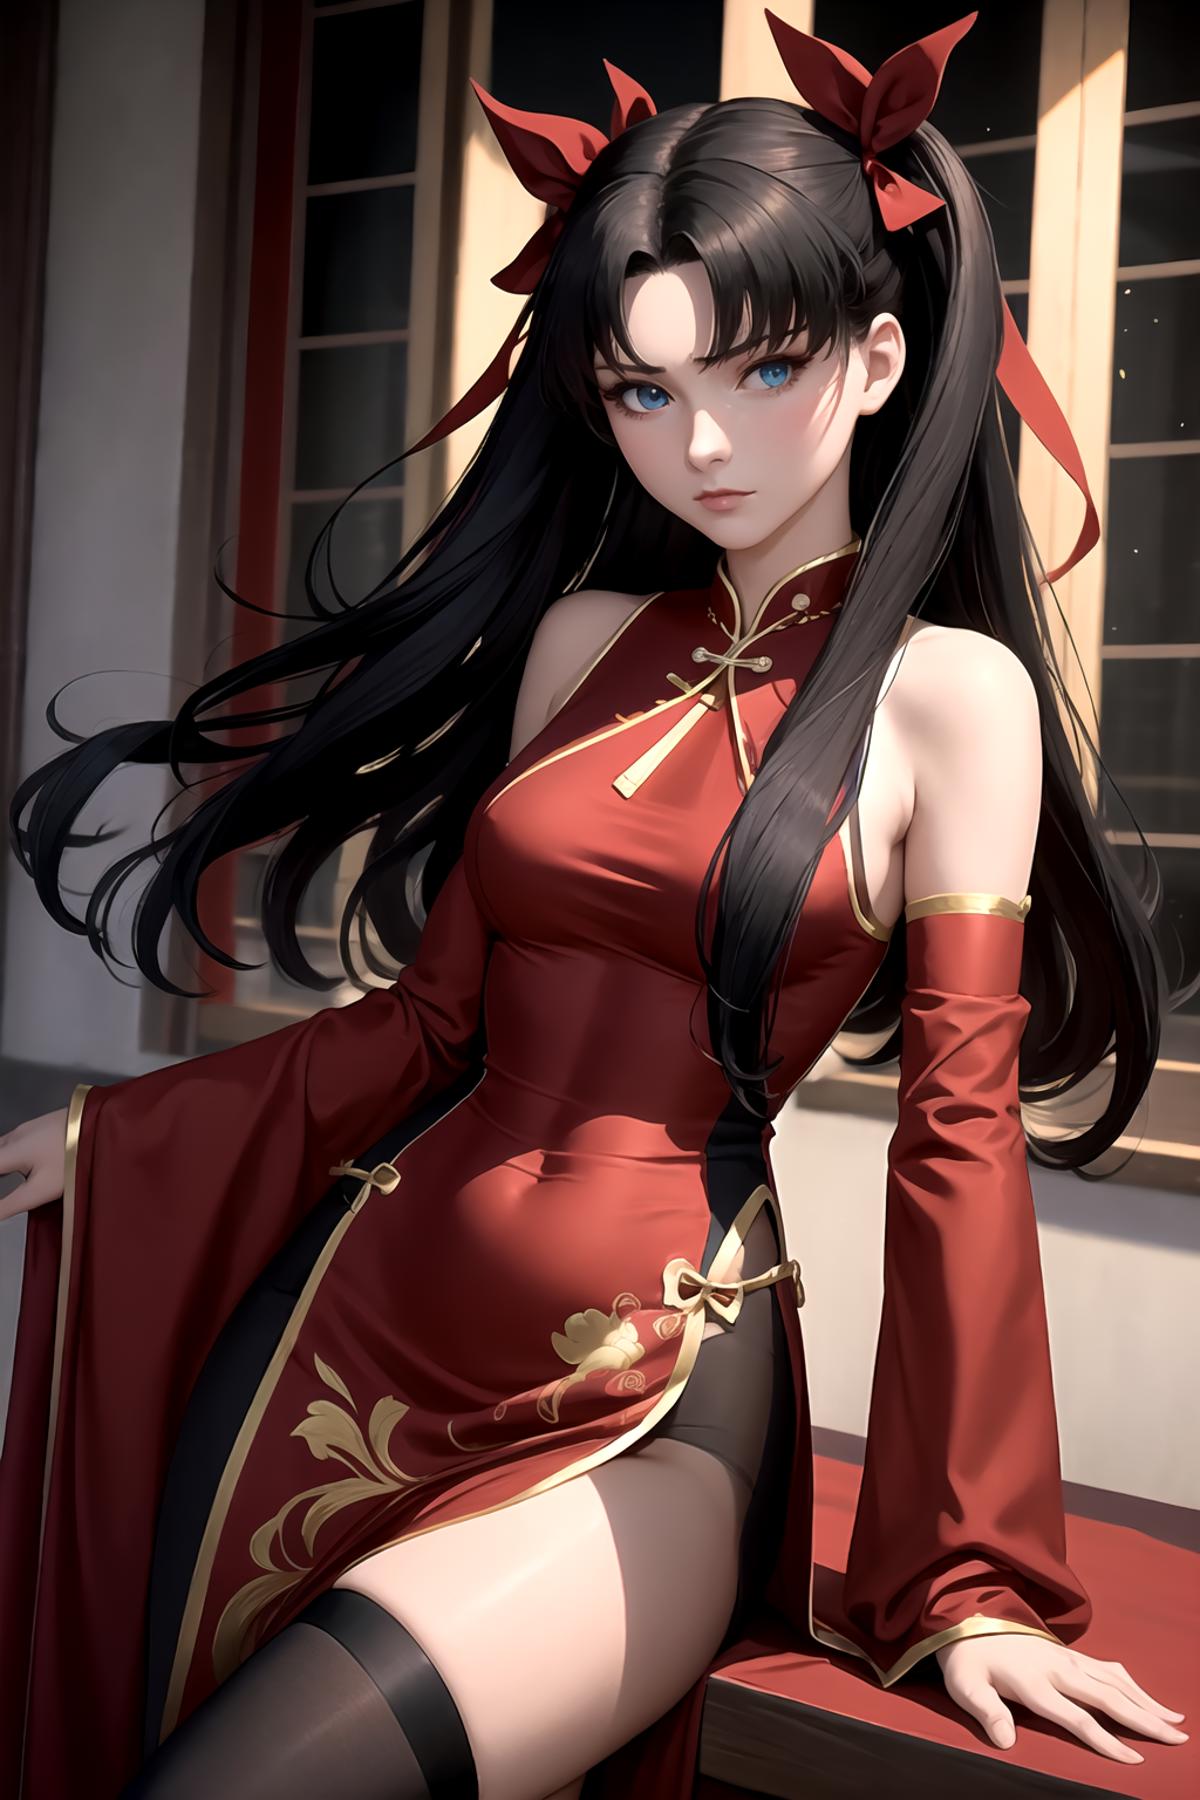 Rin Tohsaka (遠坂 凛) - Fate/stay Night image by TheUltimate